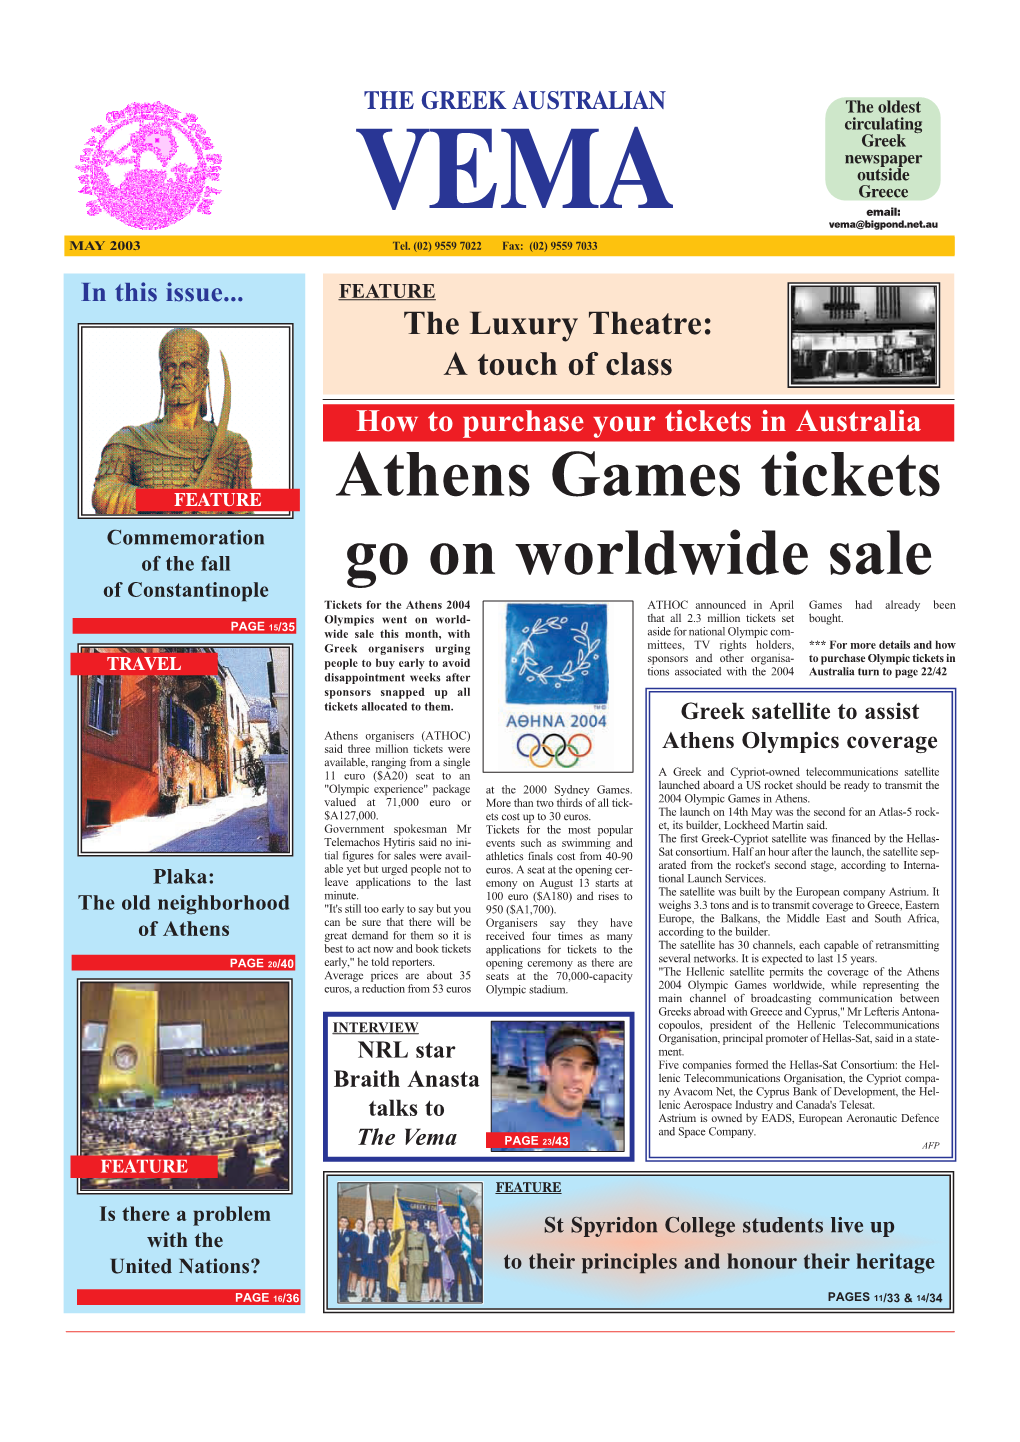 Athens Games Tickets Go on Worldwide Sale